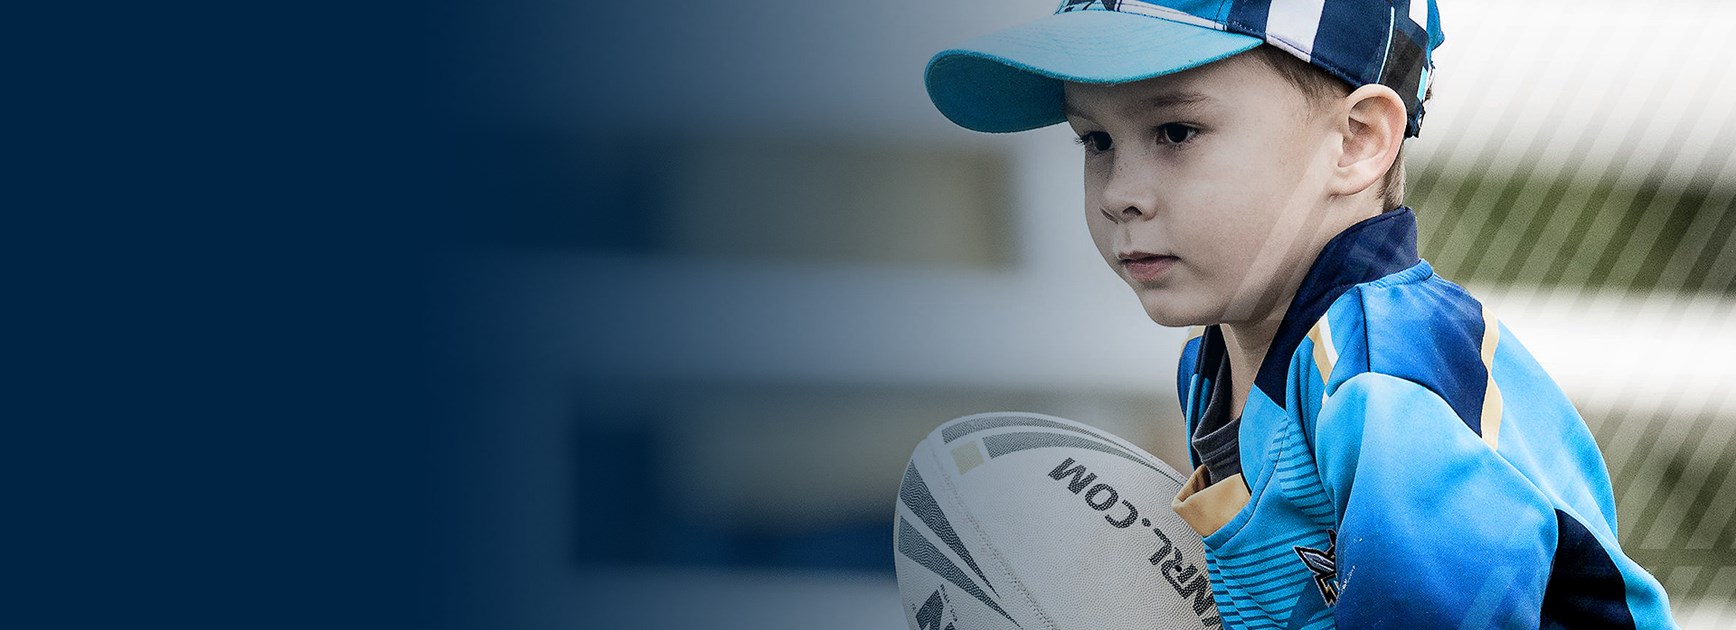 Titans junior footy clinics for Tweed Heads and Ormeau